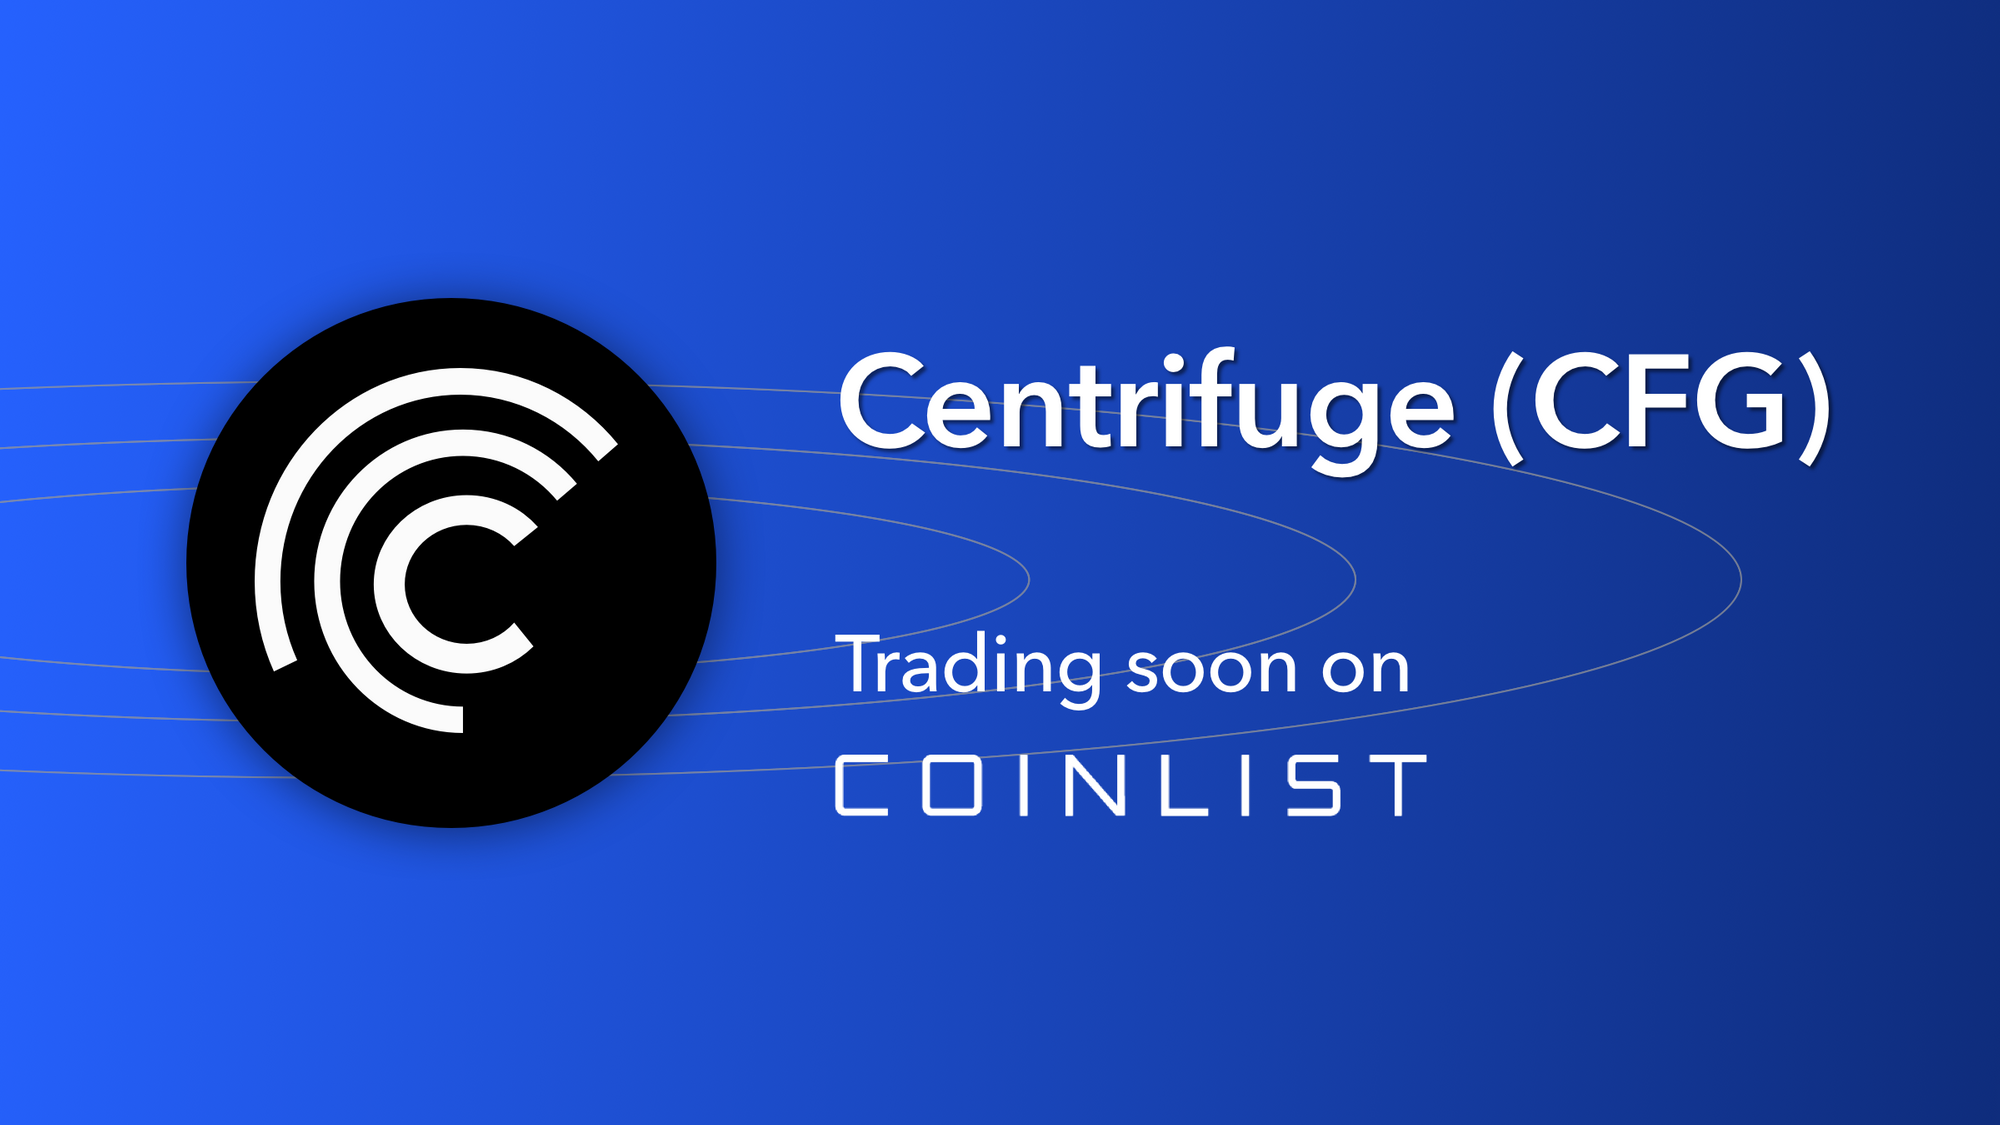 Centrifuge (CFG) Trading Soon on CoinList